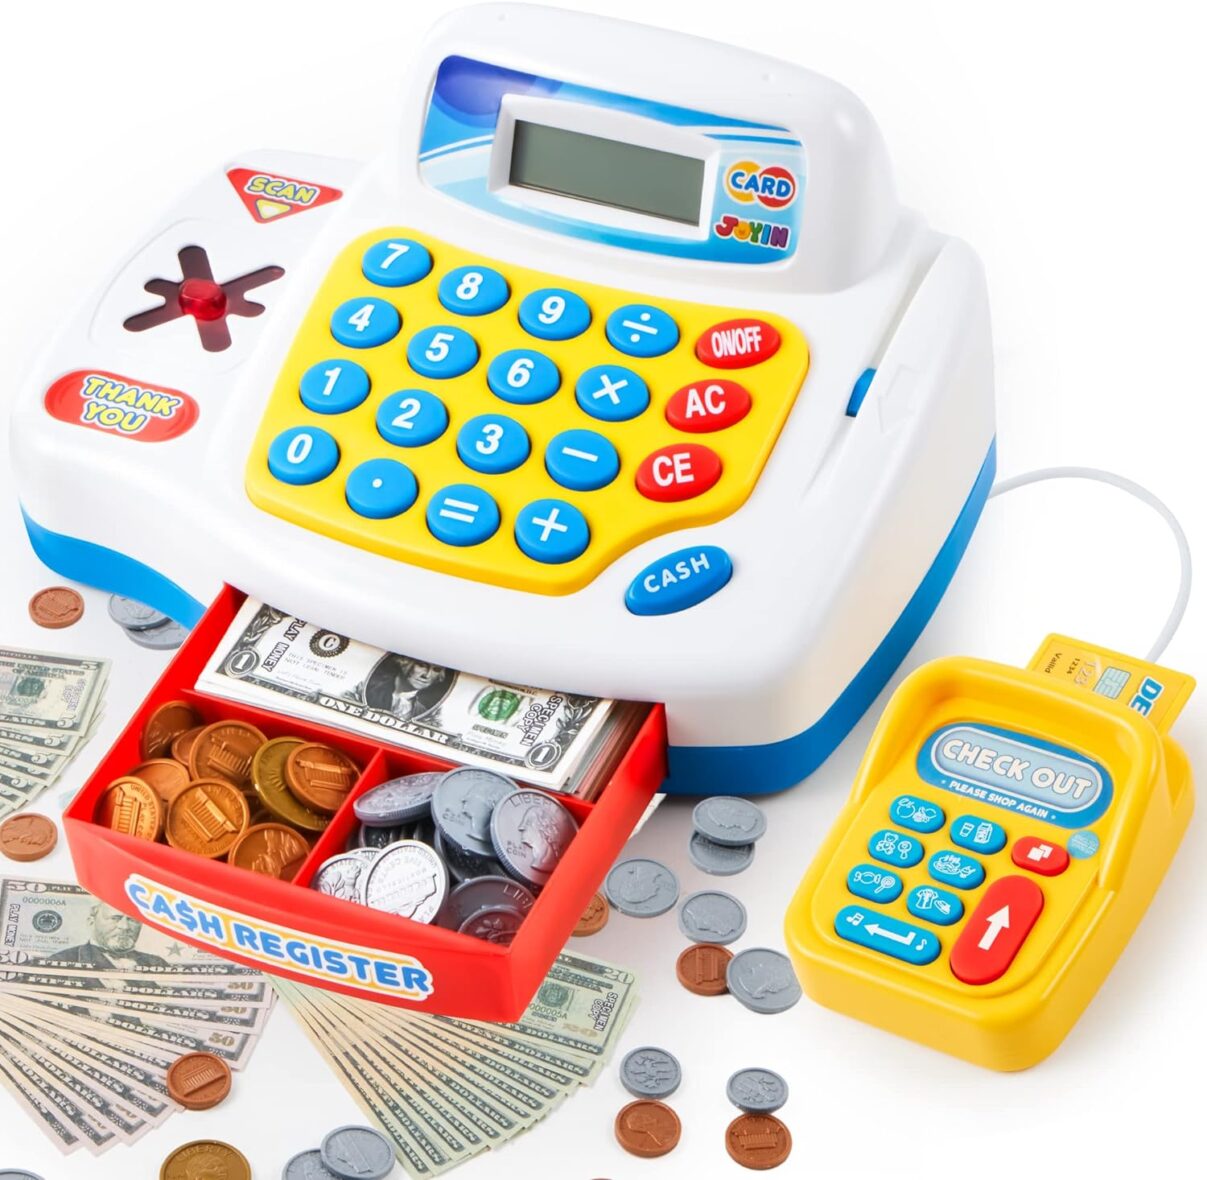 JOYIN Pretend Play Calculator Cash Register, Kids Cash Register Includes Play Money, Scanner, Card Reader, Grocery Store Play Food, Credit Card for Toddler Ages 3+ Develops Early Math Learning Skill